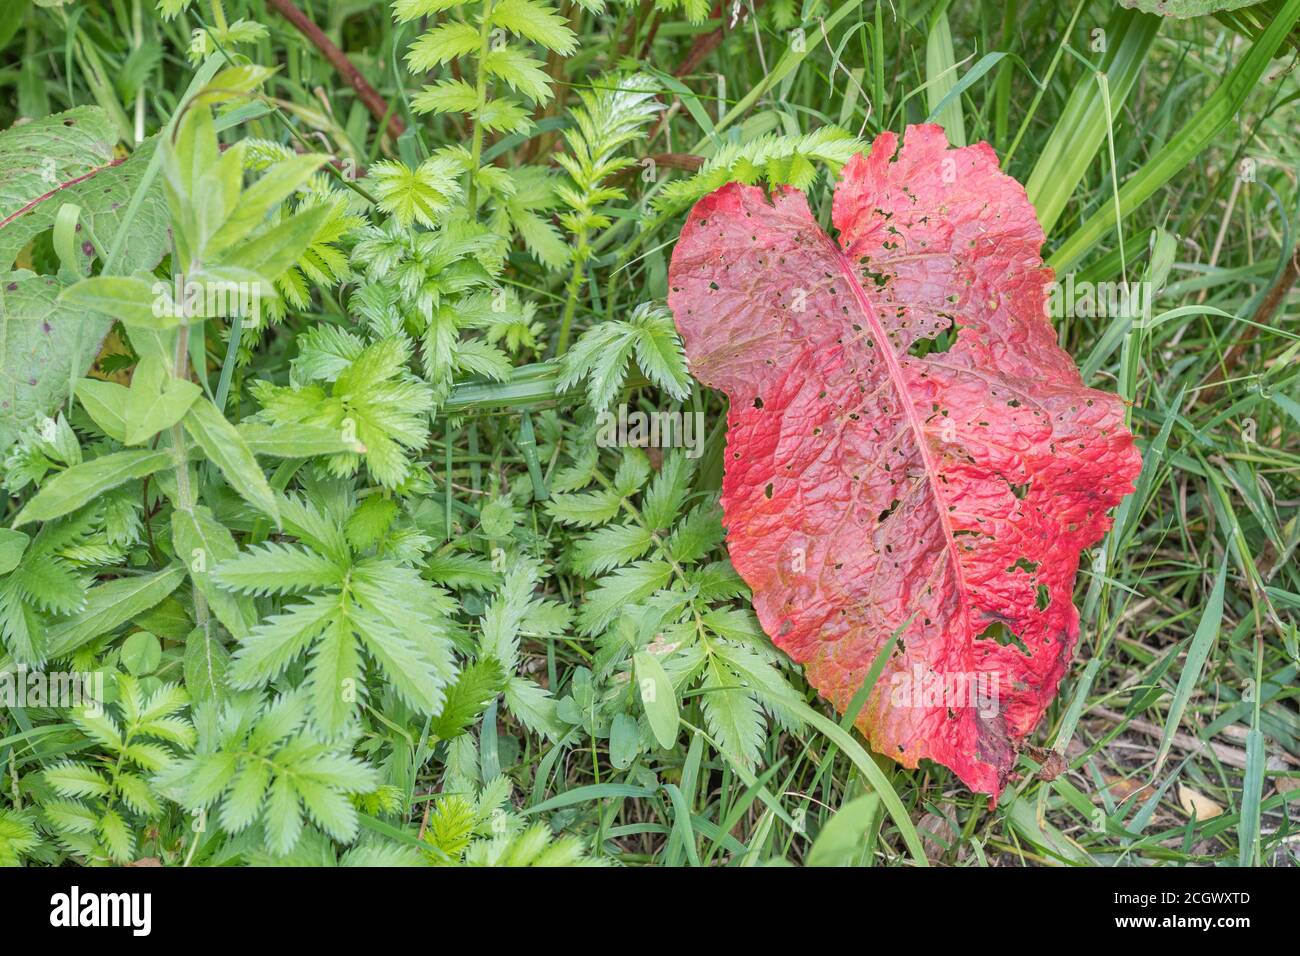 Shot of diseased leaf of Broad-Leaved Dock / Rumex obtusifolius - possibly from Ramularia rubella - in a grass verge. For plant disease, common weeds. Stock Photo